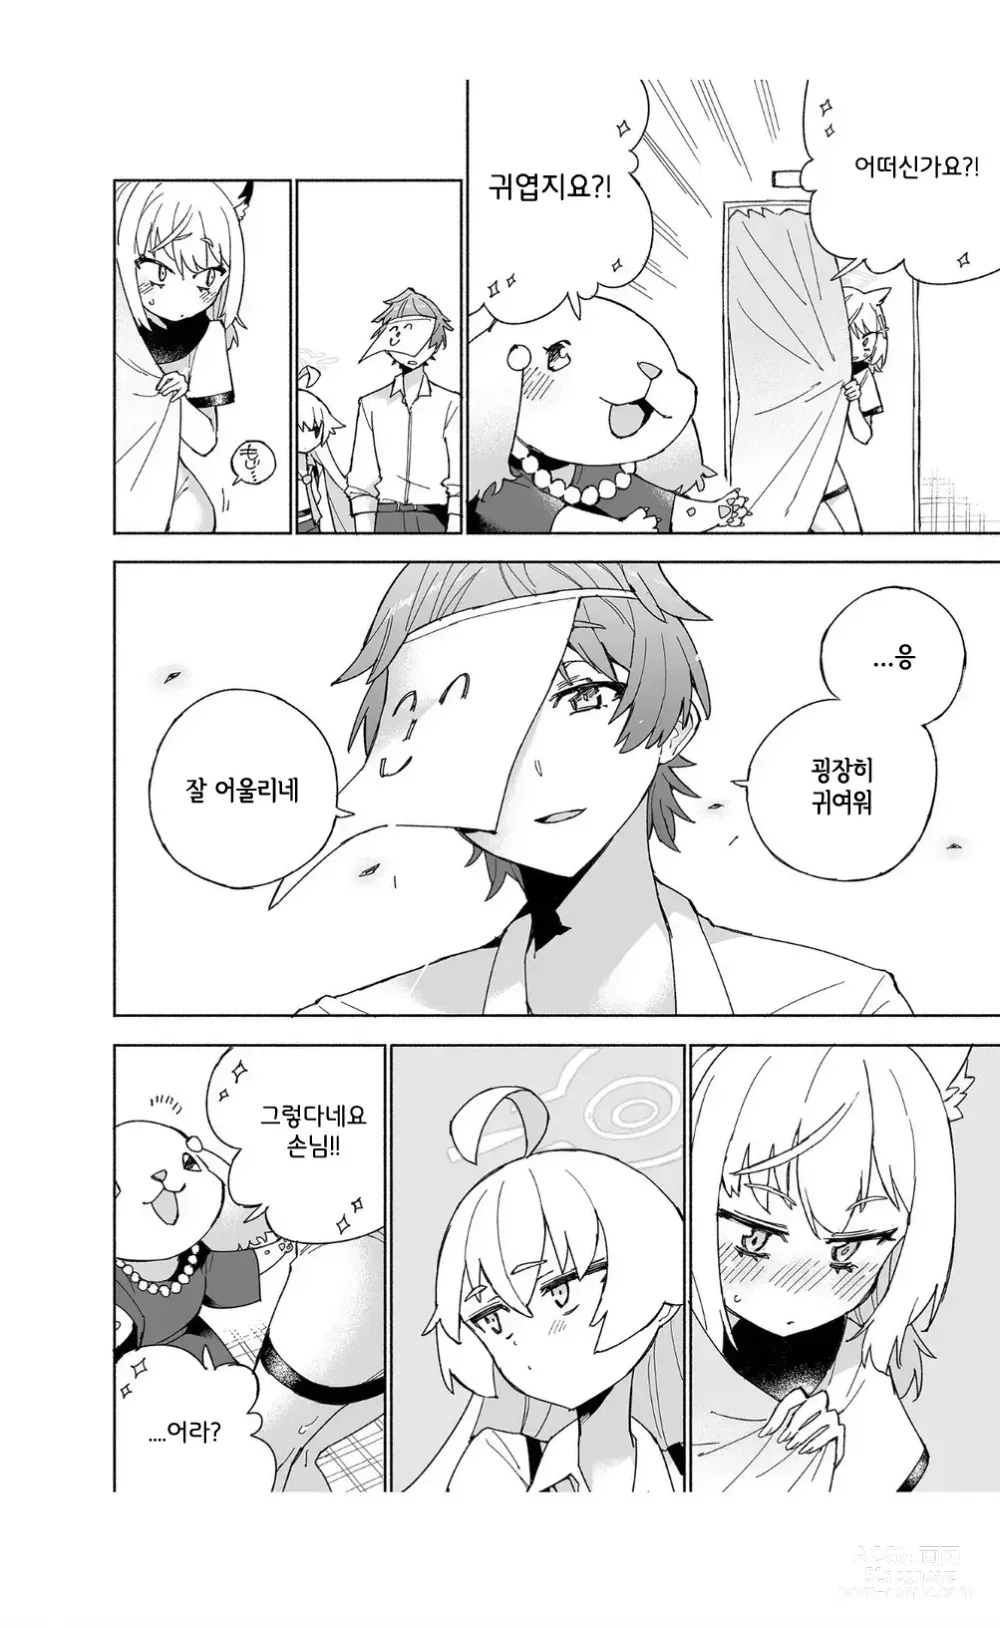 Page 13 of doujinshi 늑대의 물